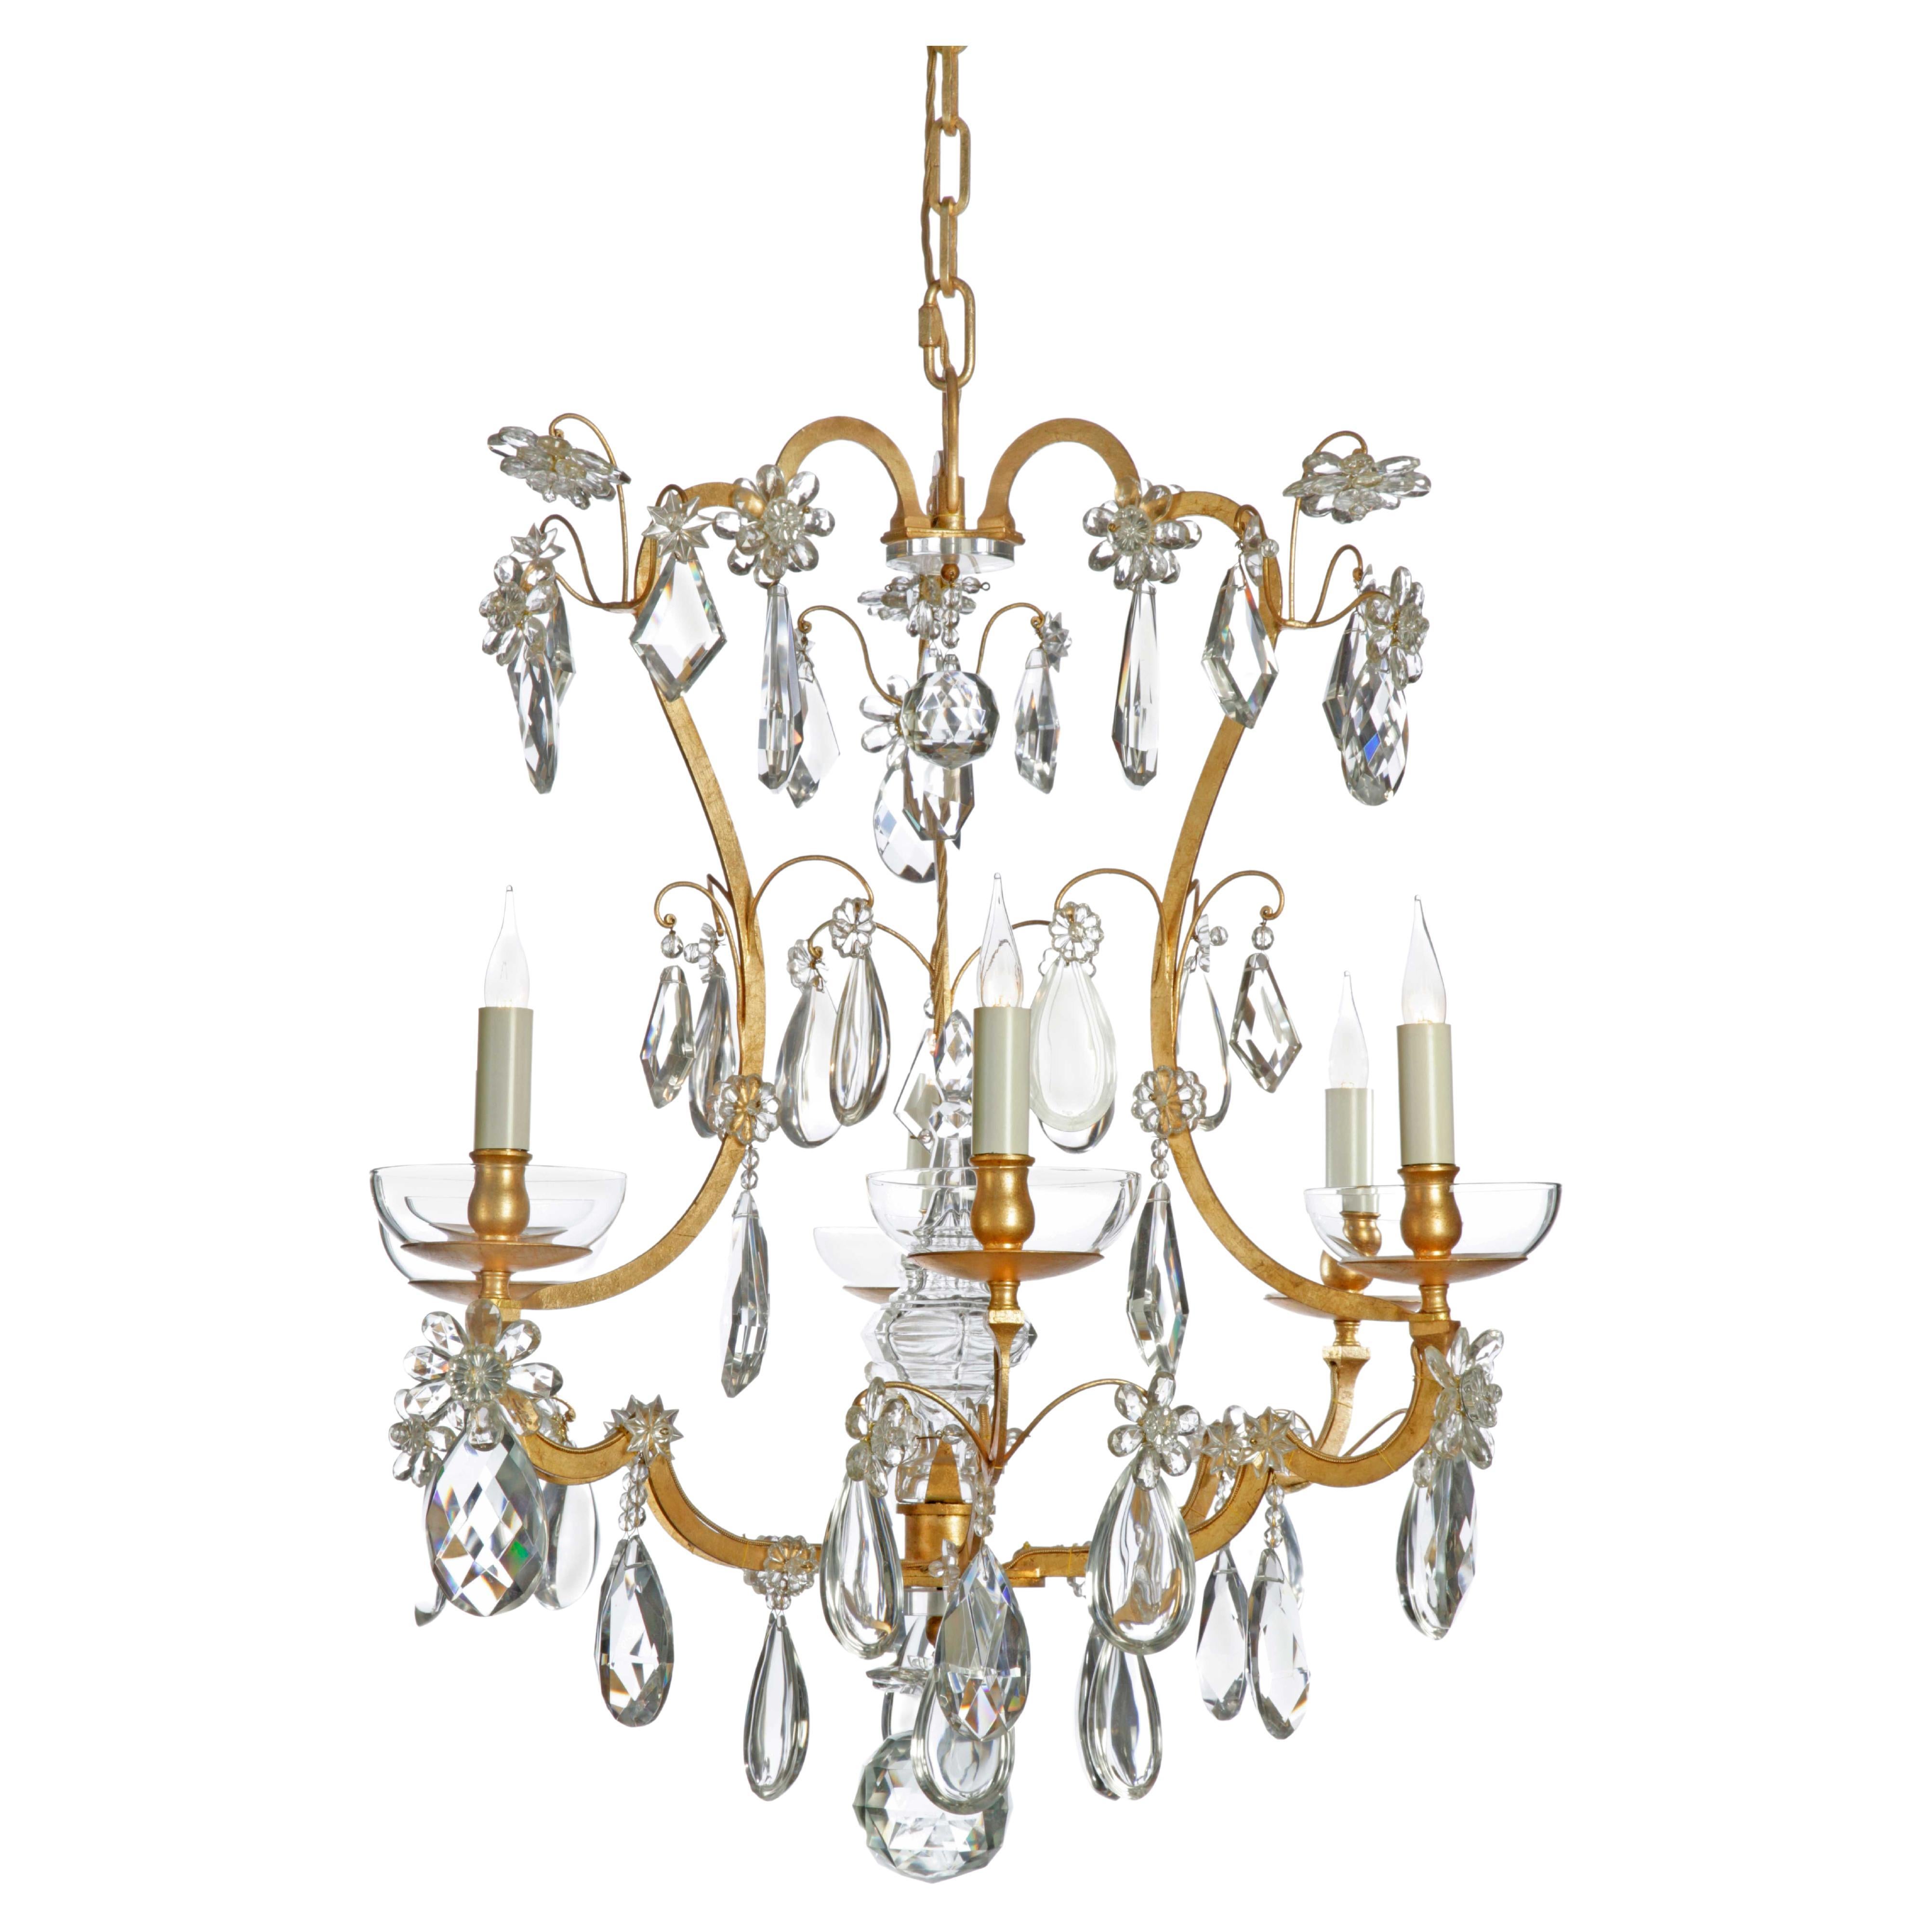 Certified Maison Bagues Chandelier, 6 Lights Iron & Crystal #17012 For Sale